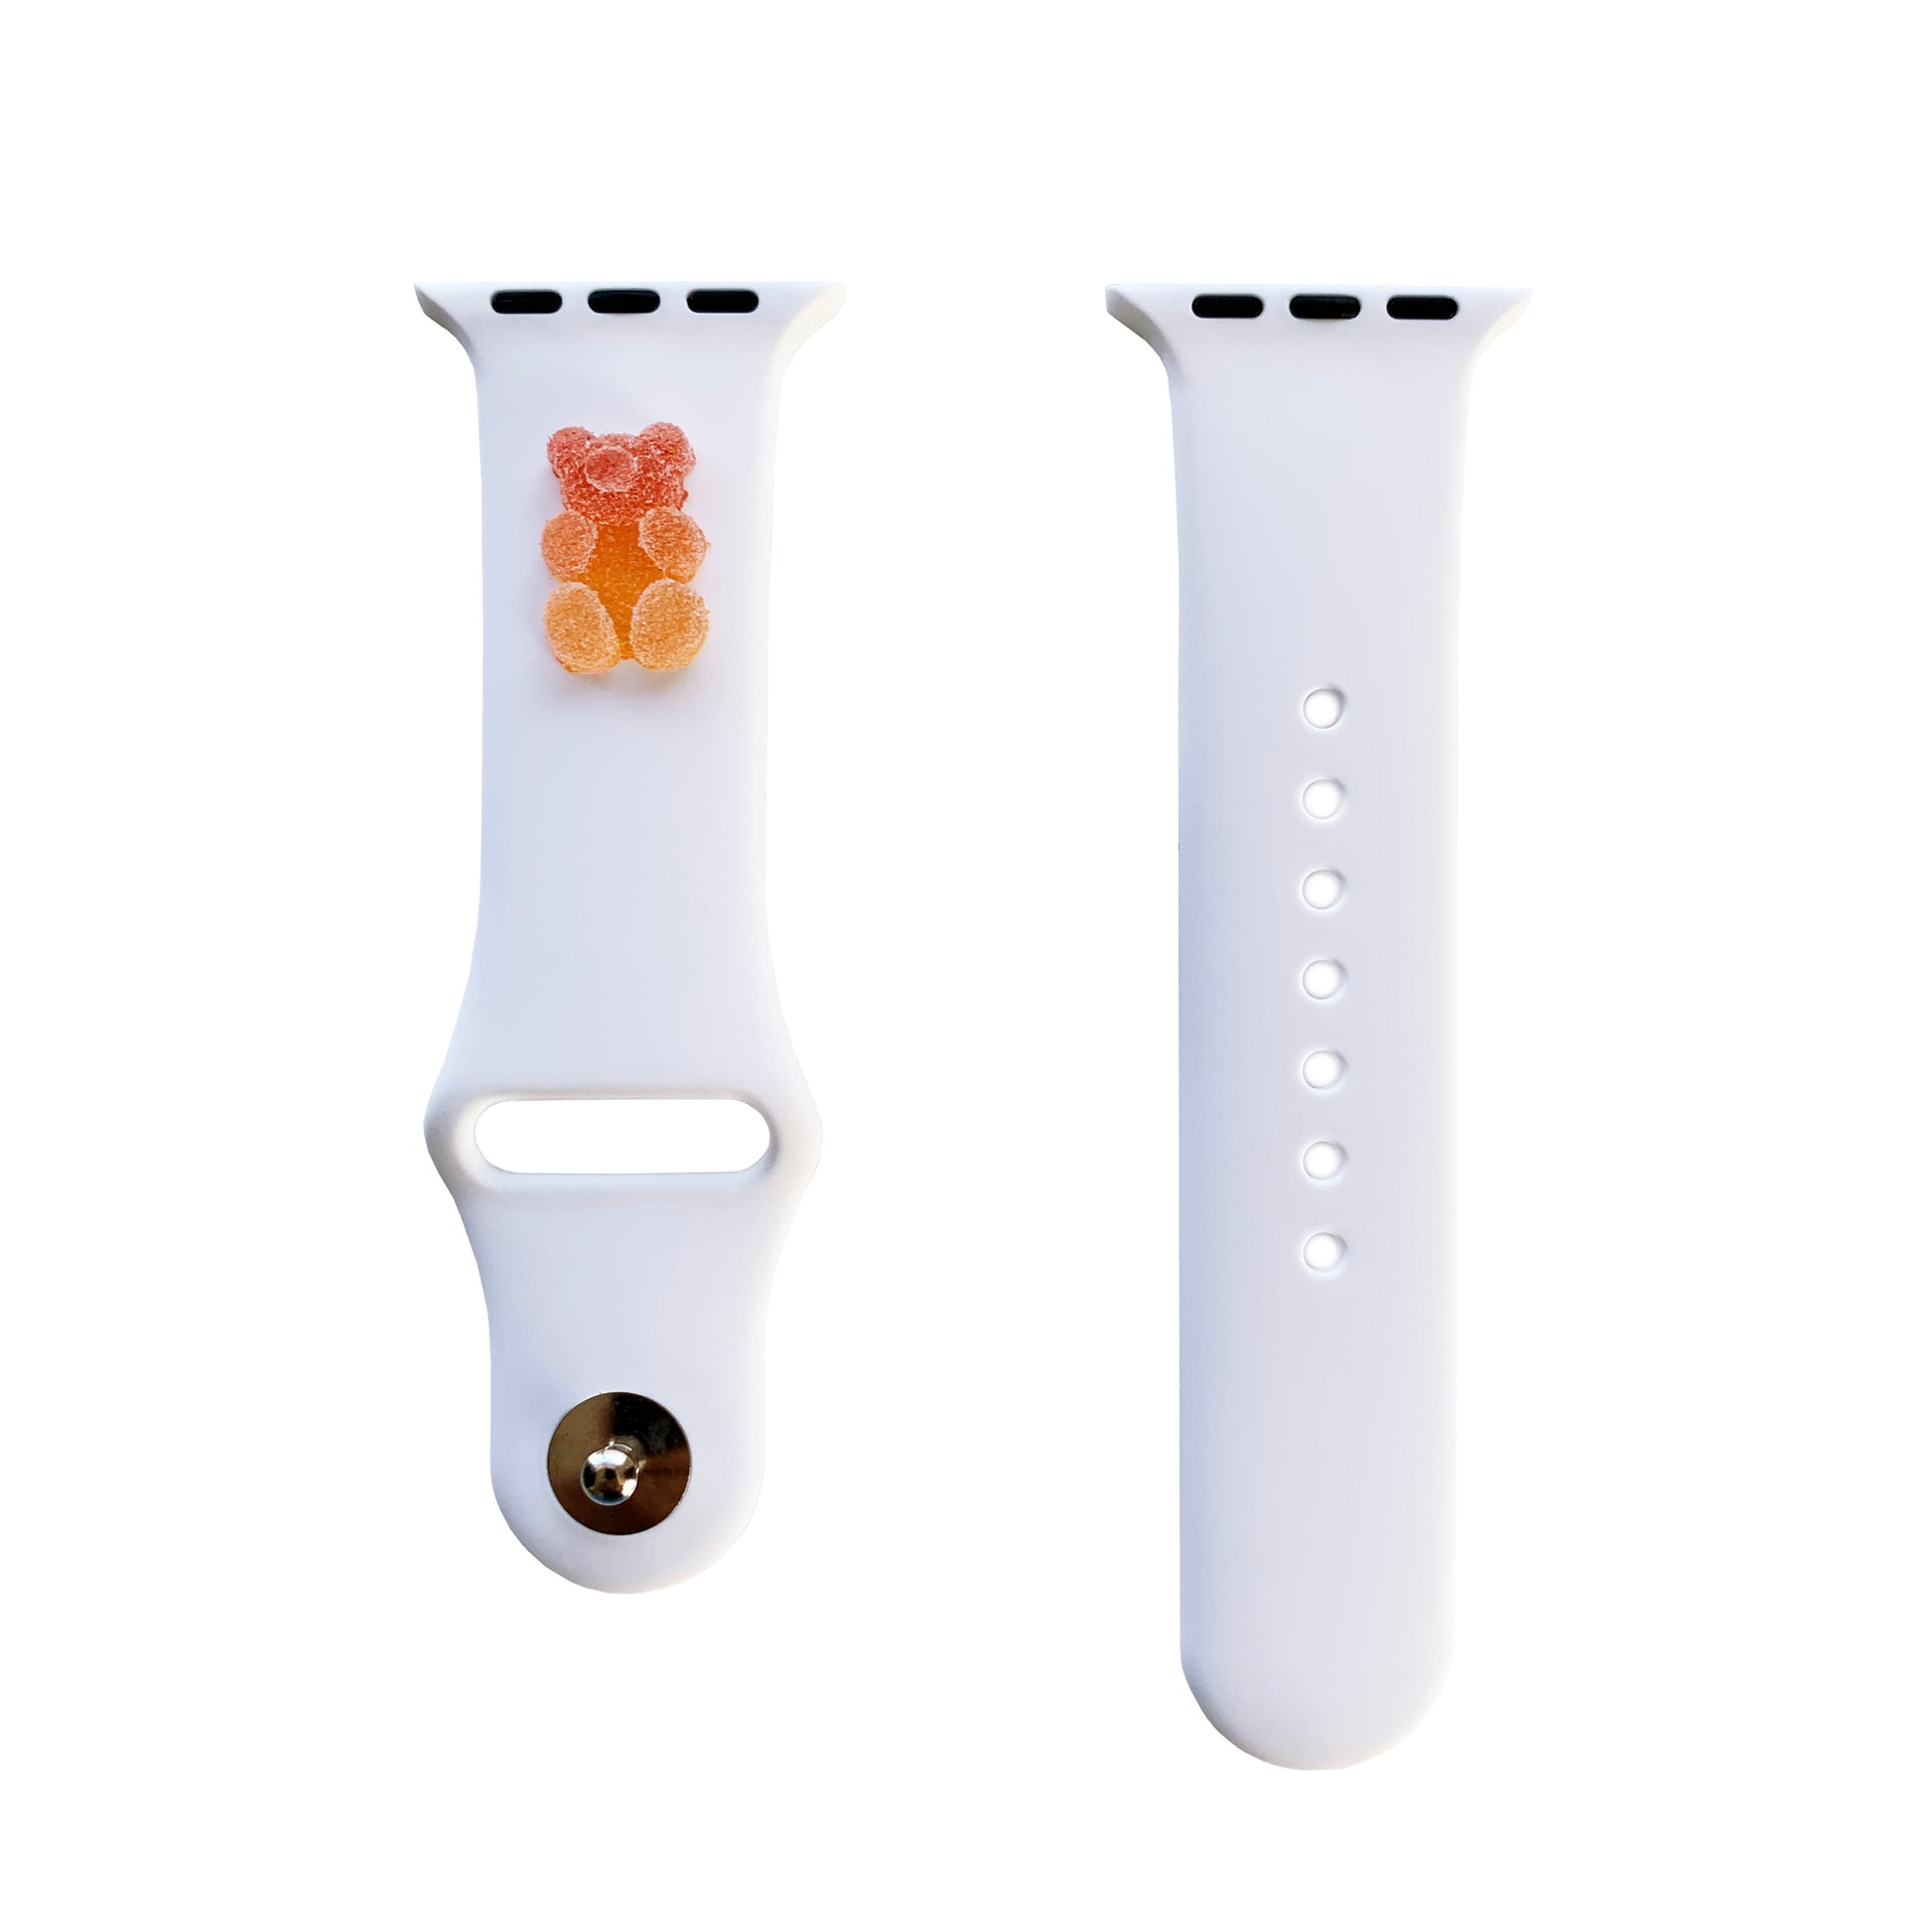 A small red and orange 3D printed gummy bear attached to a white silicon watch band for the apple watch